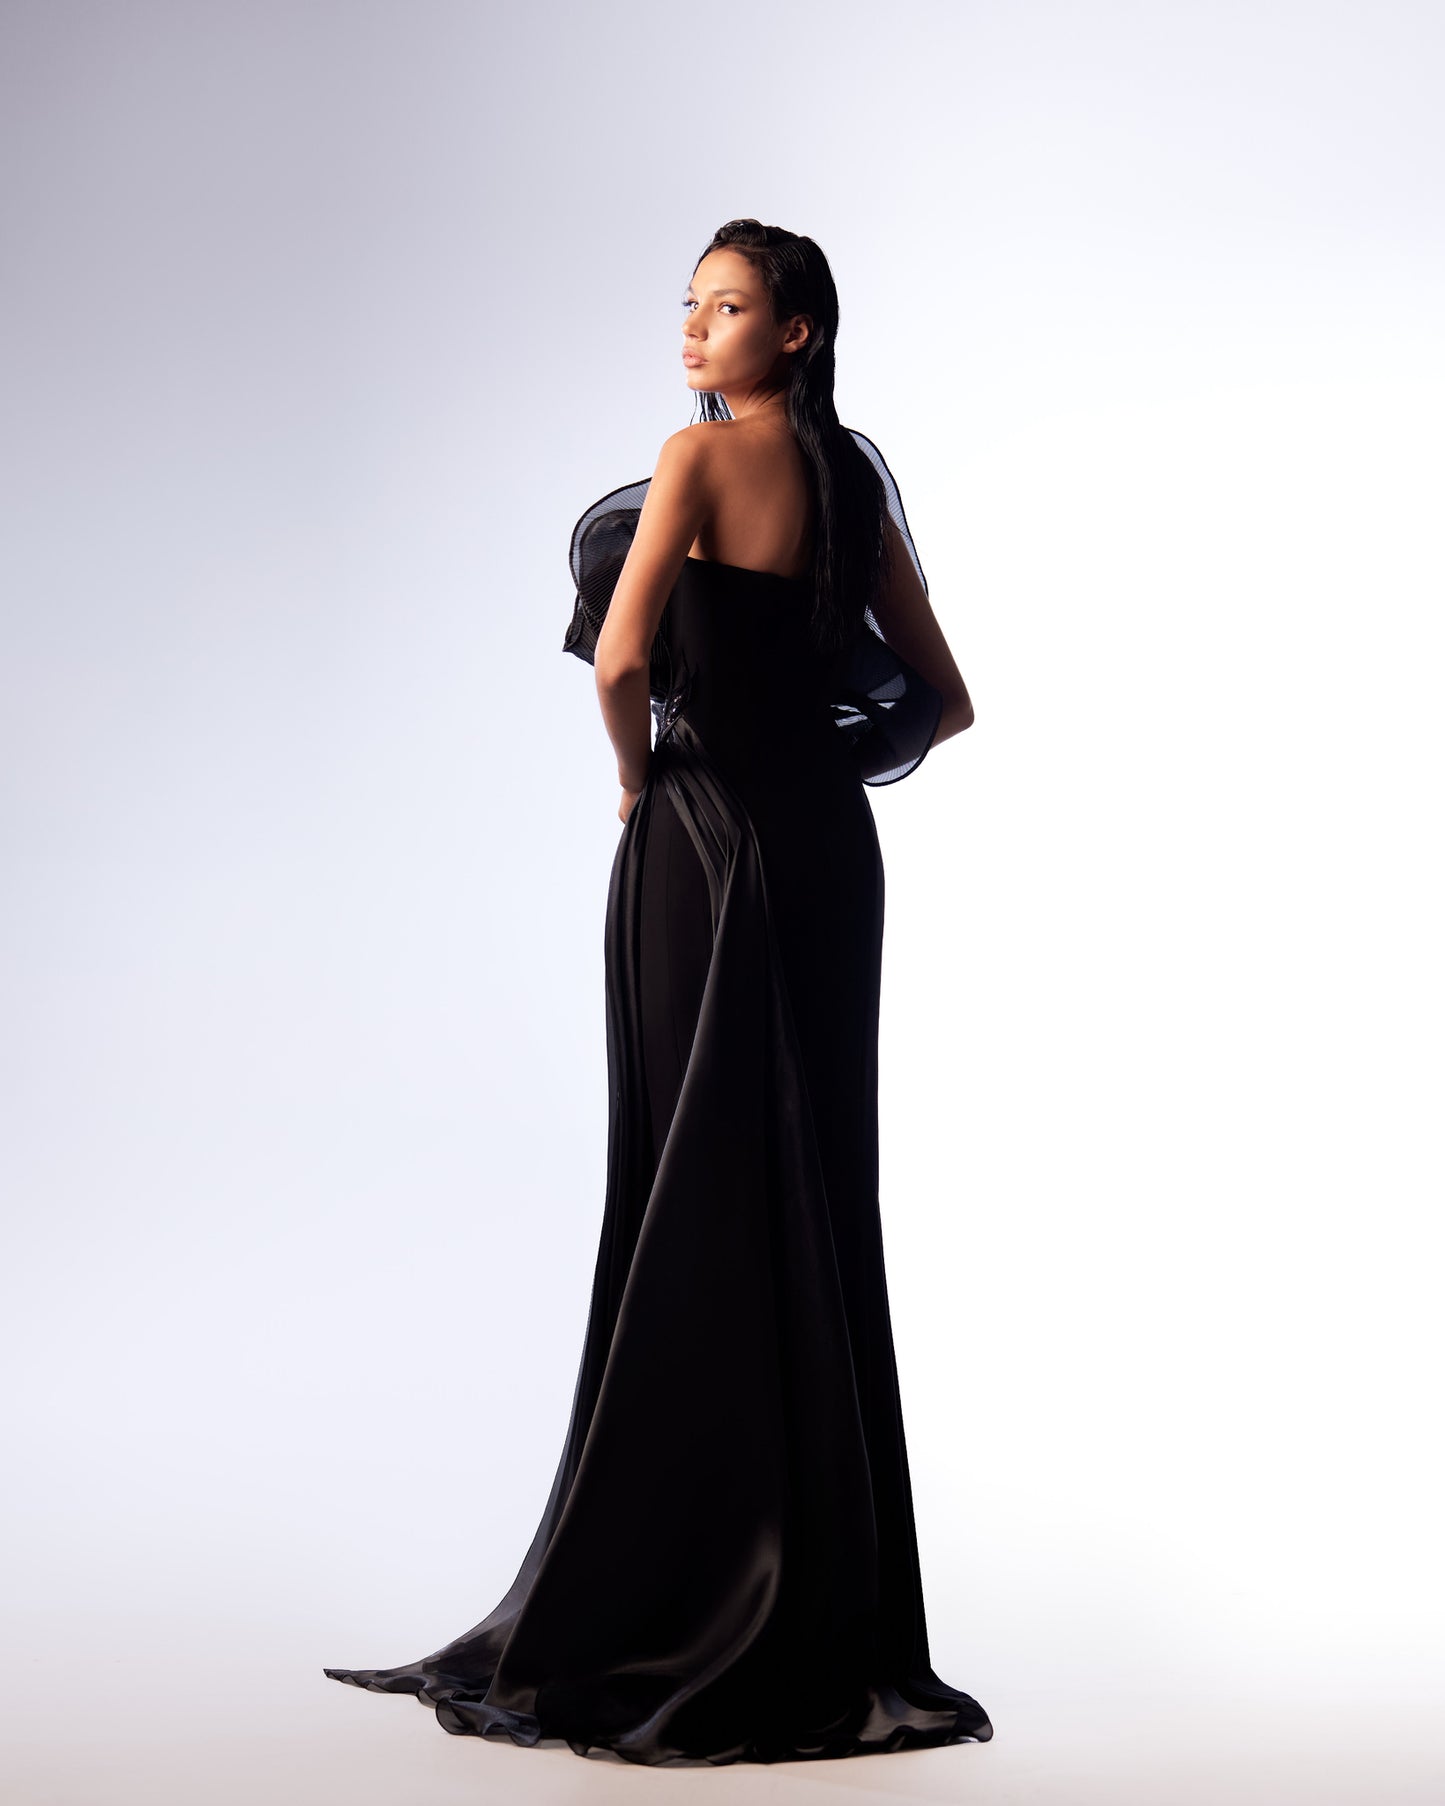 An elegant model displays the Enigmatic Noir Ruffle Gown, a black satin evening dress with a structured, sculptural ruffle bodice, and a high slit on the side, shown from multiple angles against a gradient background.